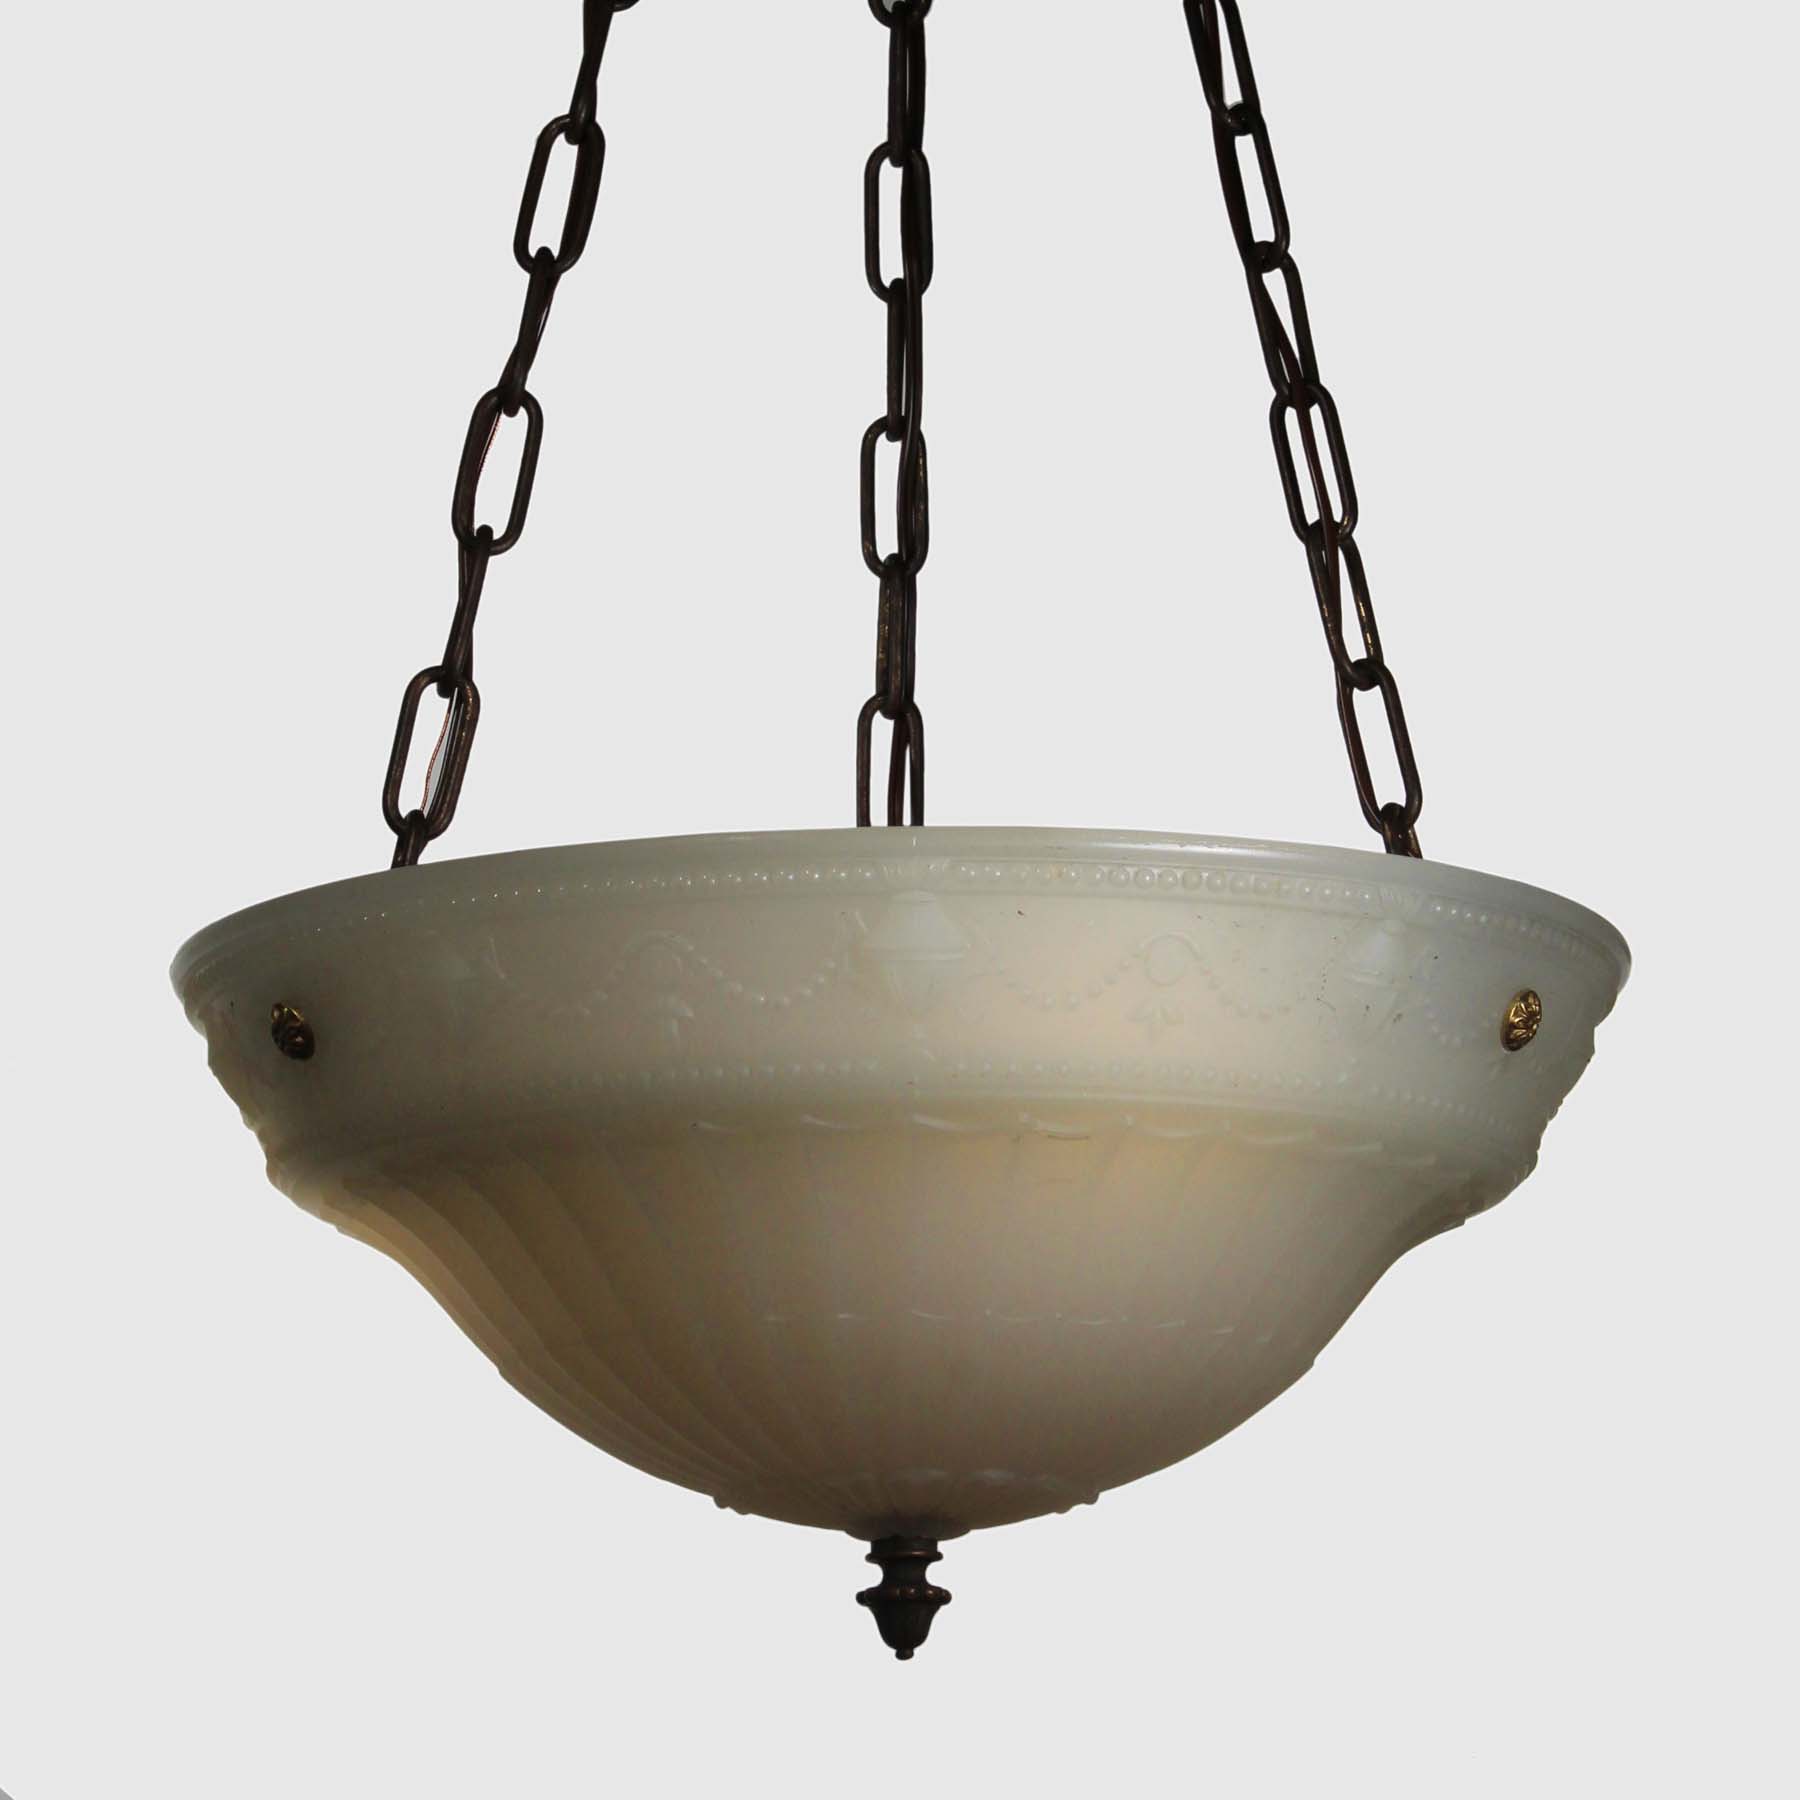 SOLD Antique Neoclassical Inverted Dome Chandelier, c. 1915-69239